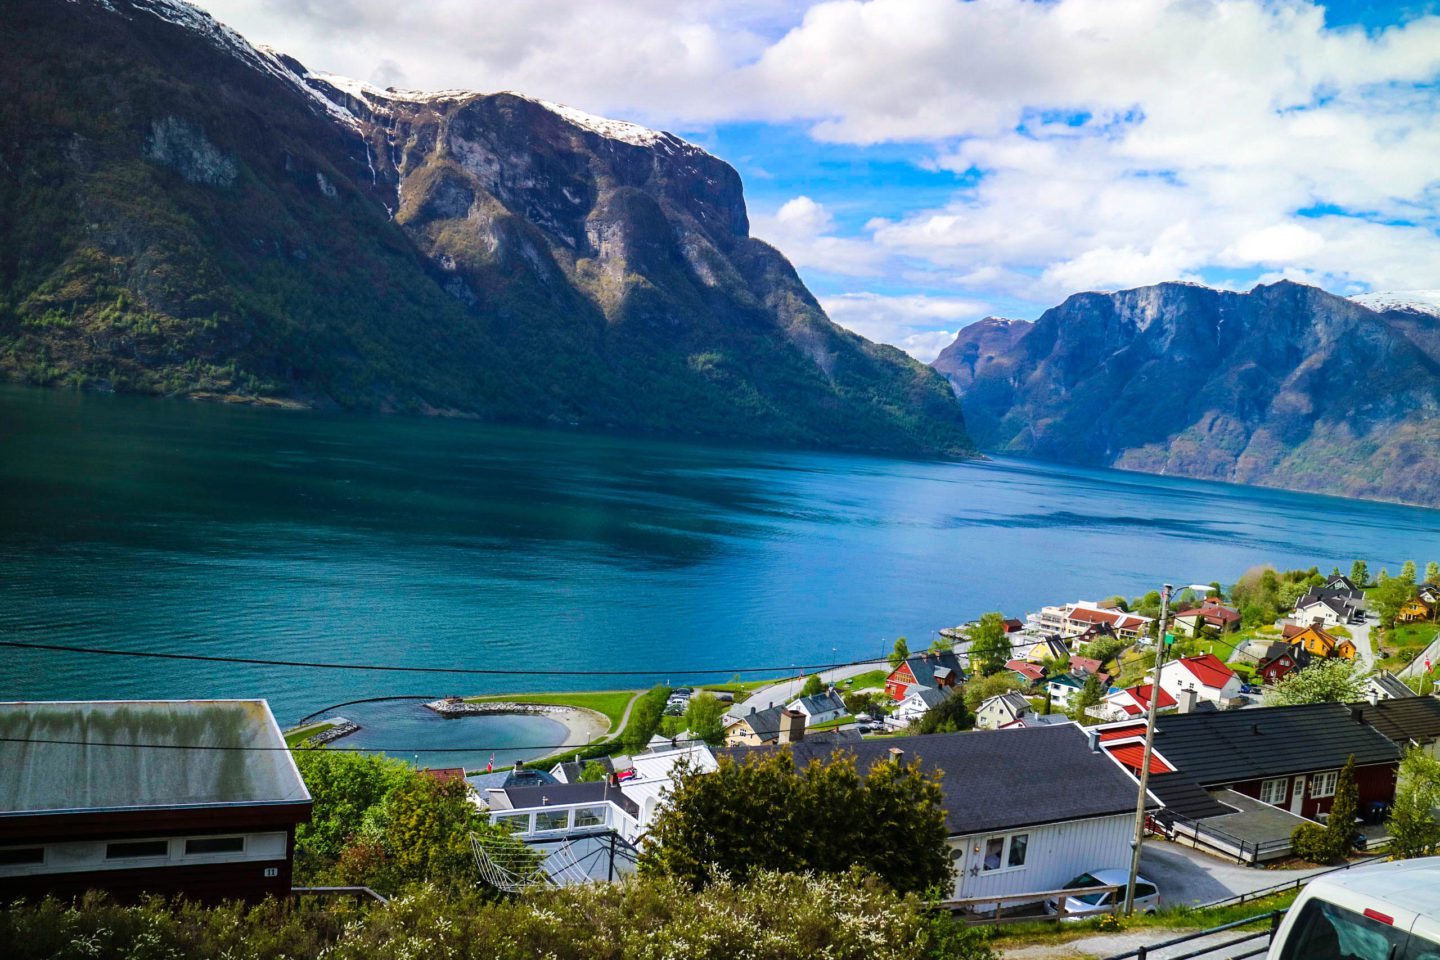 A beautiful fjord landscape, with colourful buildings lining the fjord on one side (a village called Aurland), and steep mountains on the other.